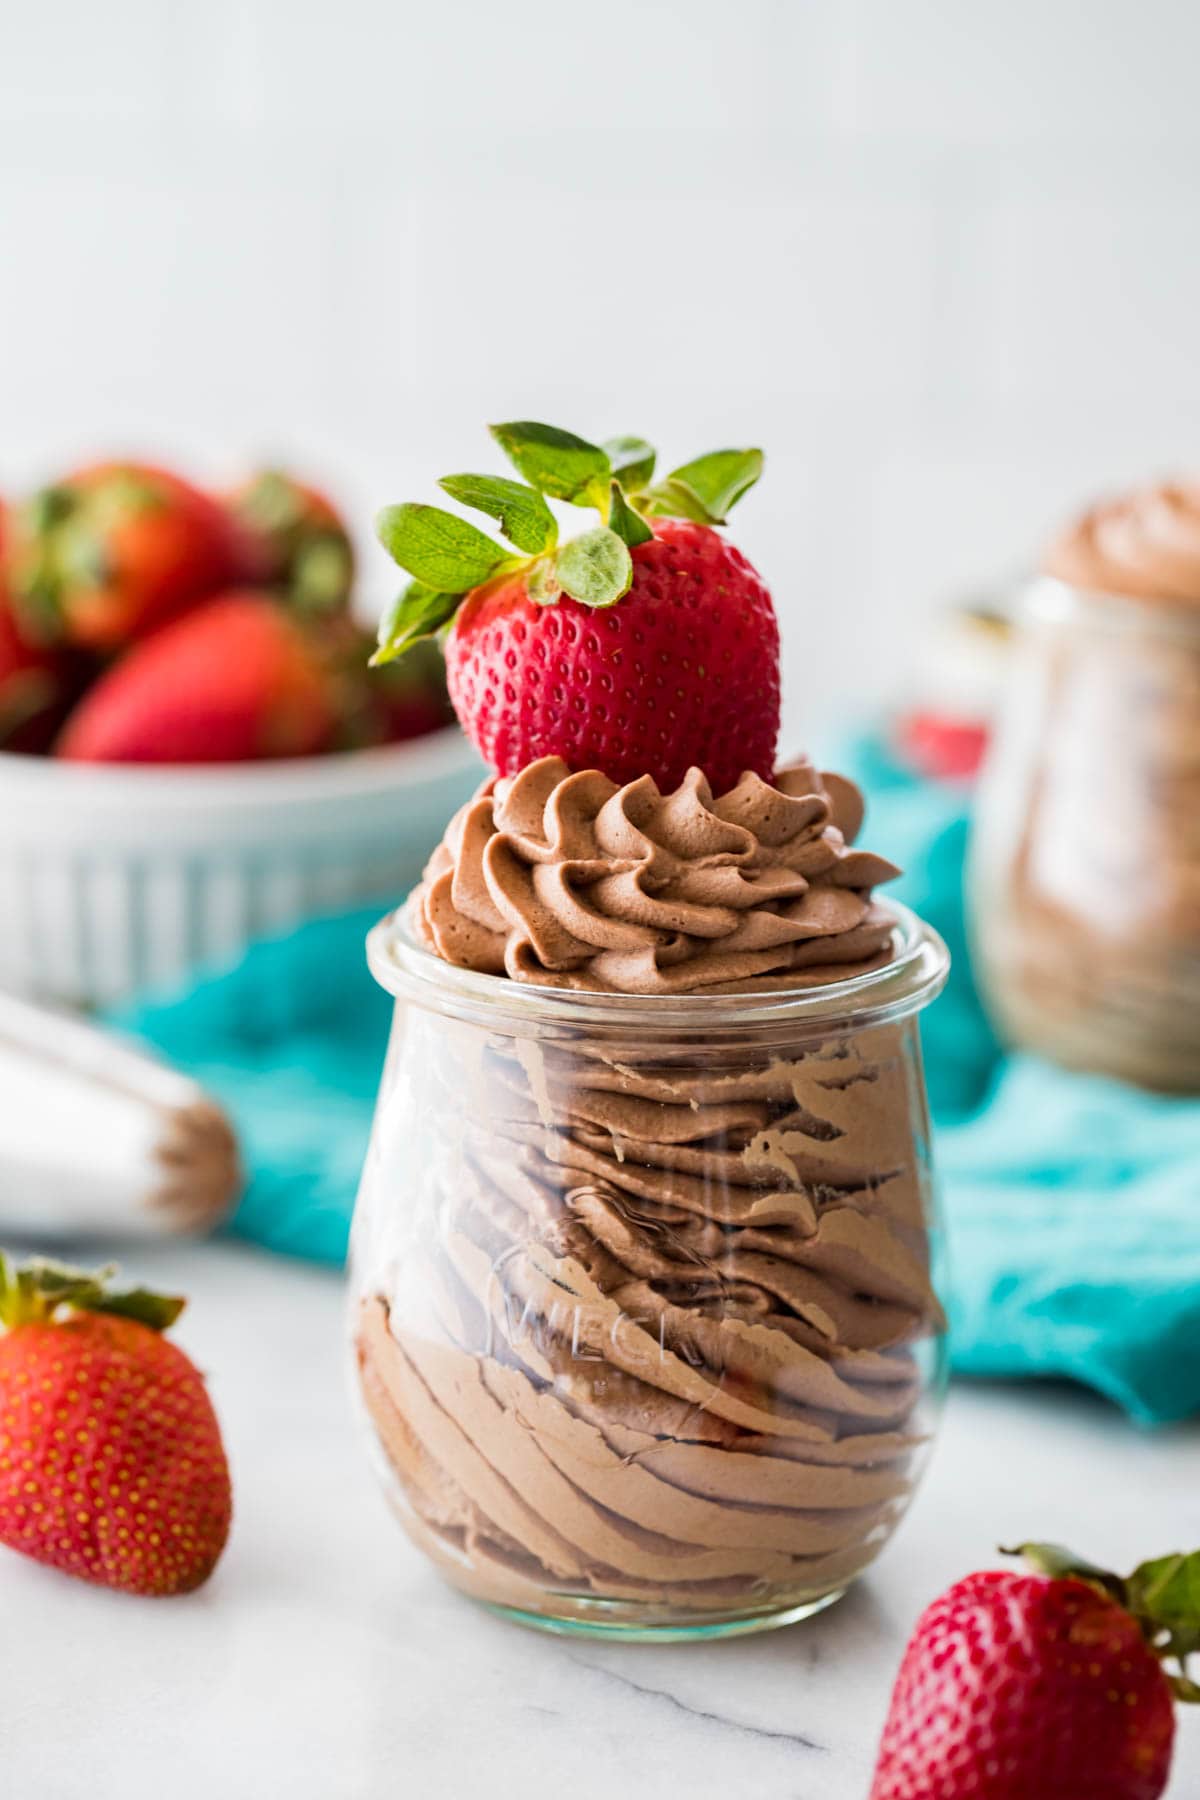 small glass jar filled with chocolate flavored whipped cream and garnished with a ripe strawberry